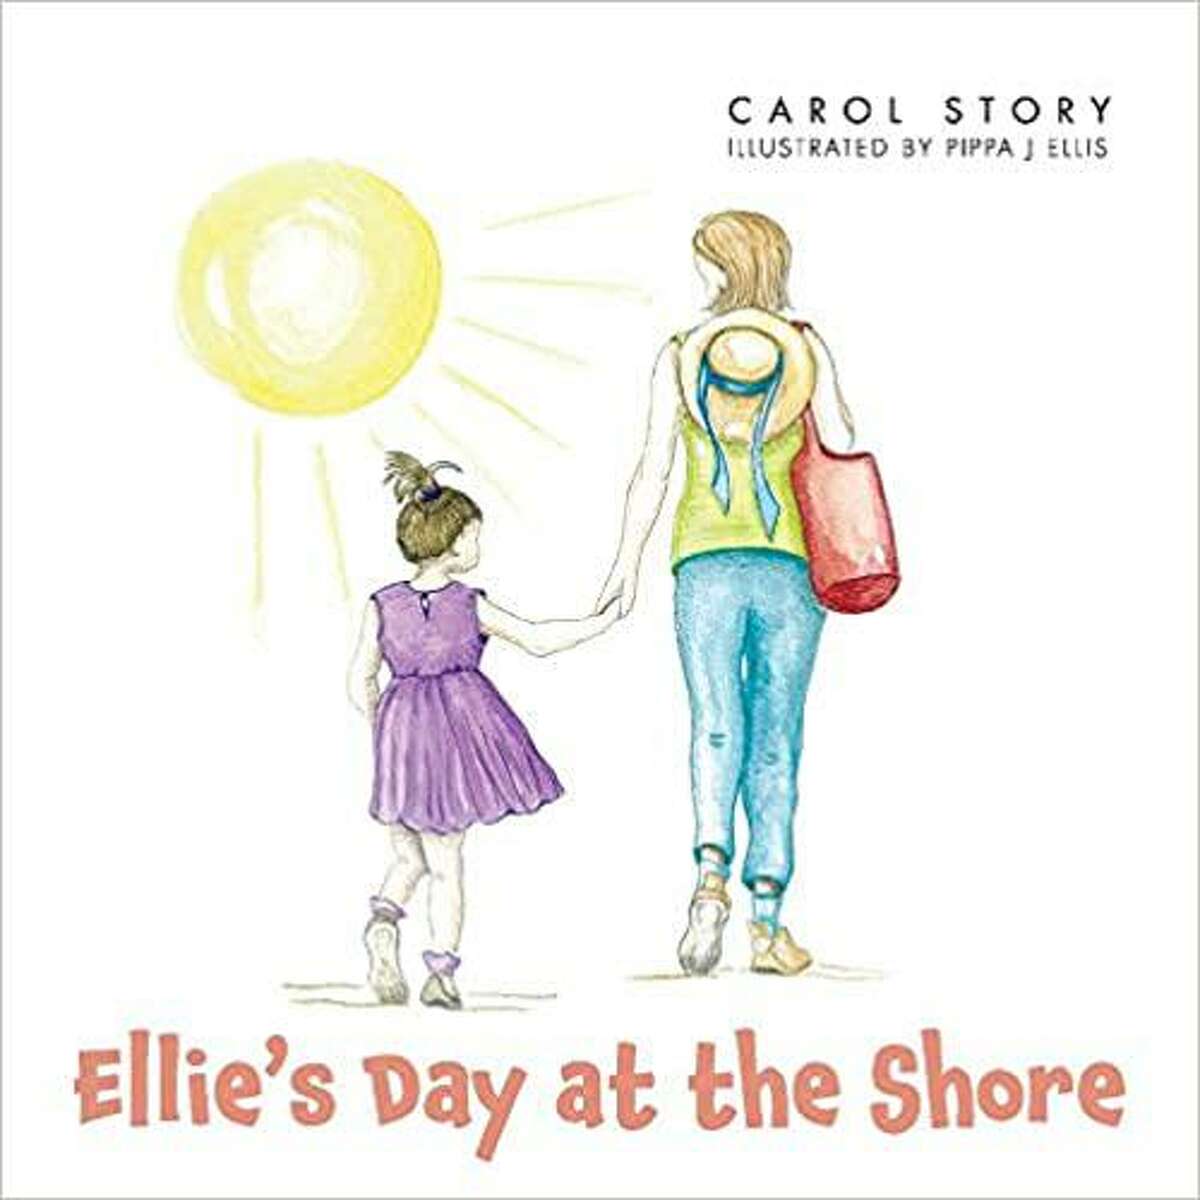 “Ellie’s Day at the Shore” is a children’s book about wildlife along the shoreline.